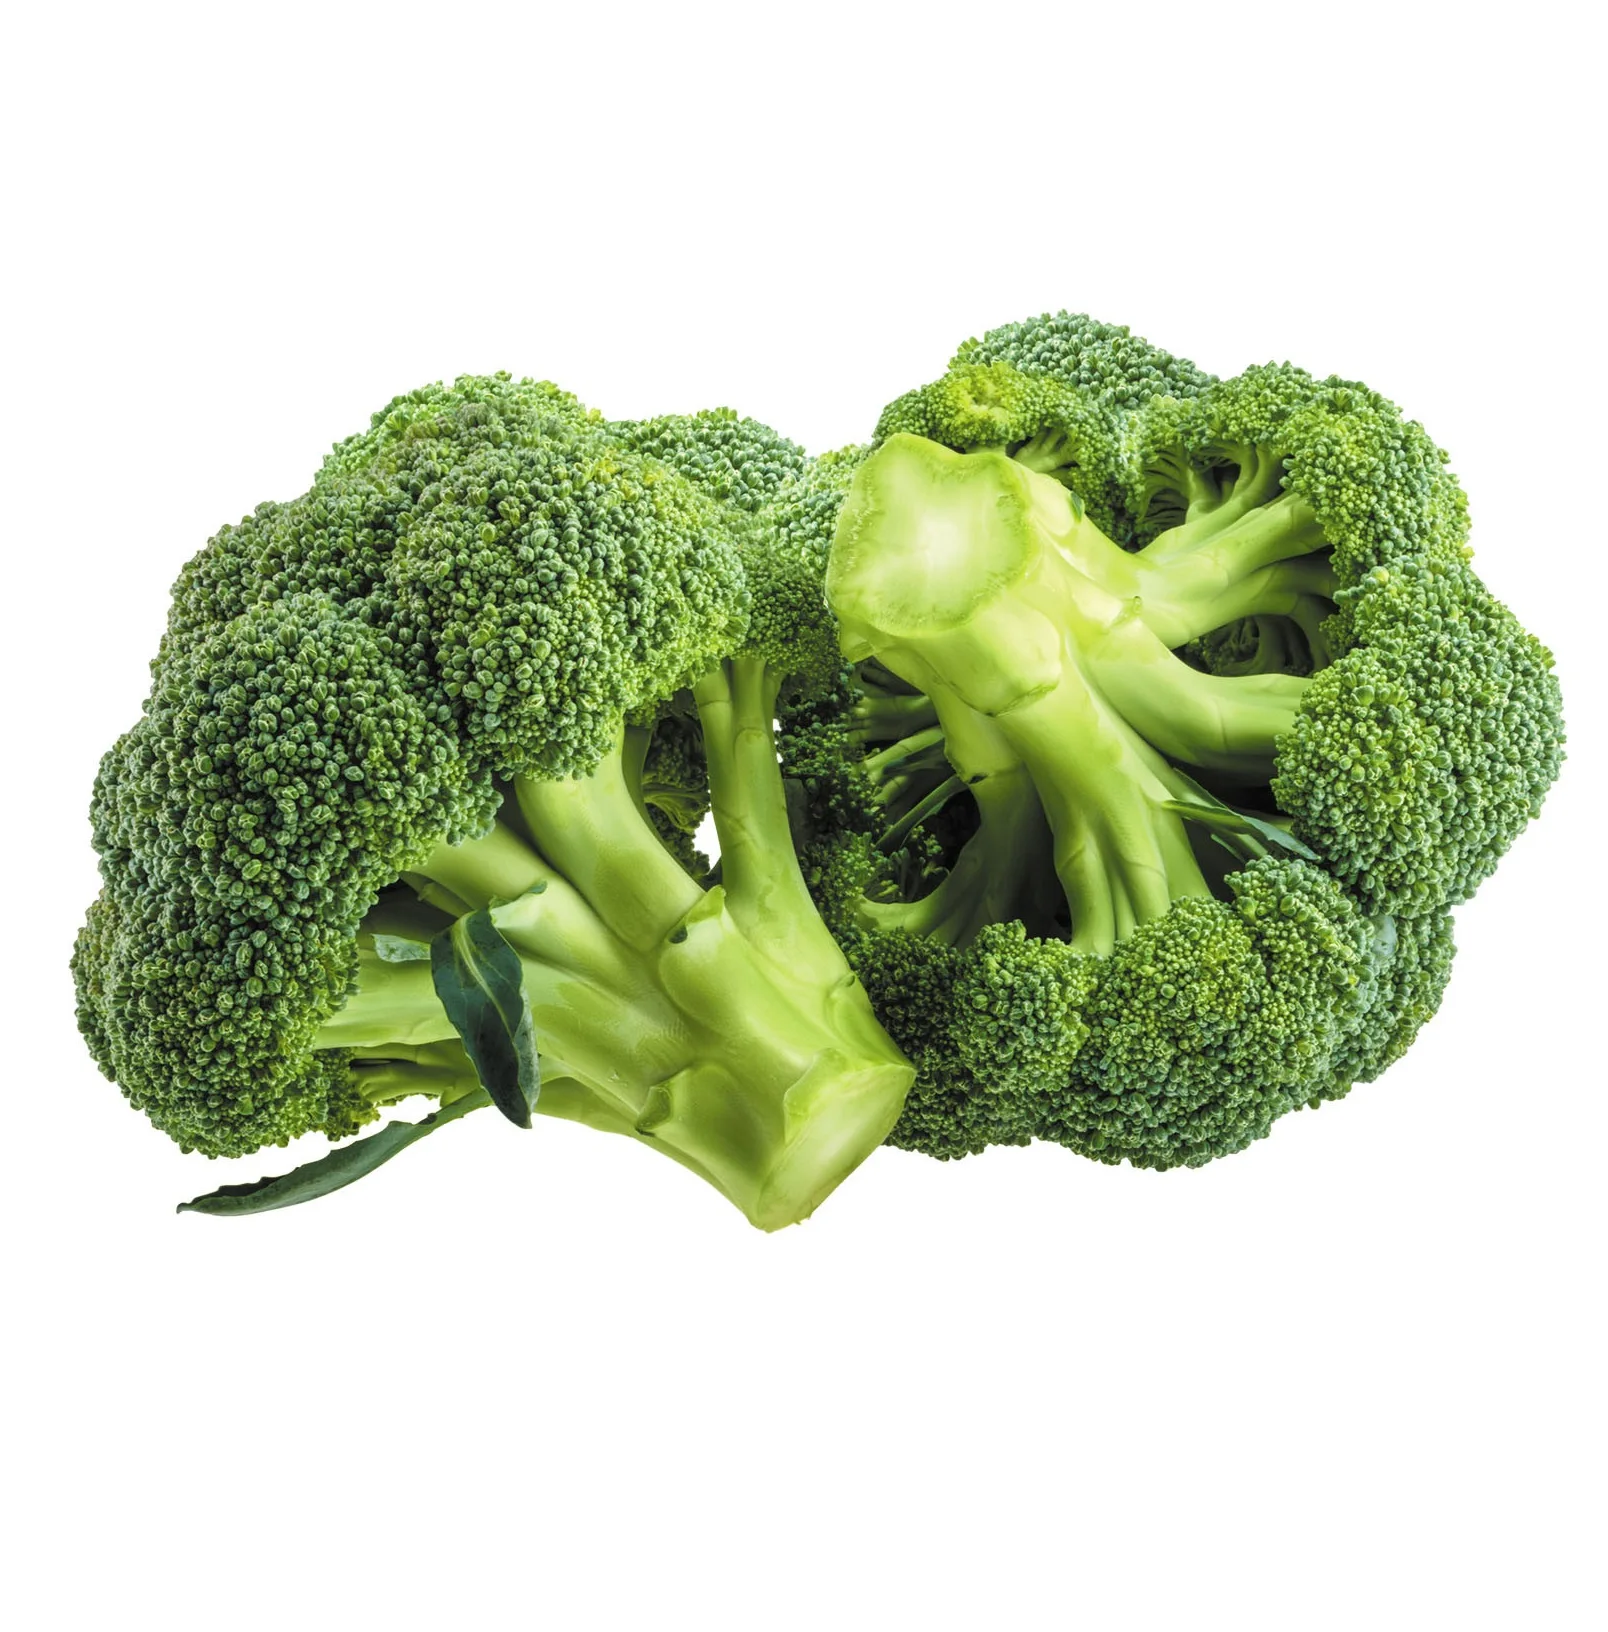 Wholesale Best Quality Fresh Broccoli For Sale In Cheap Price (11000002082641)